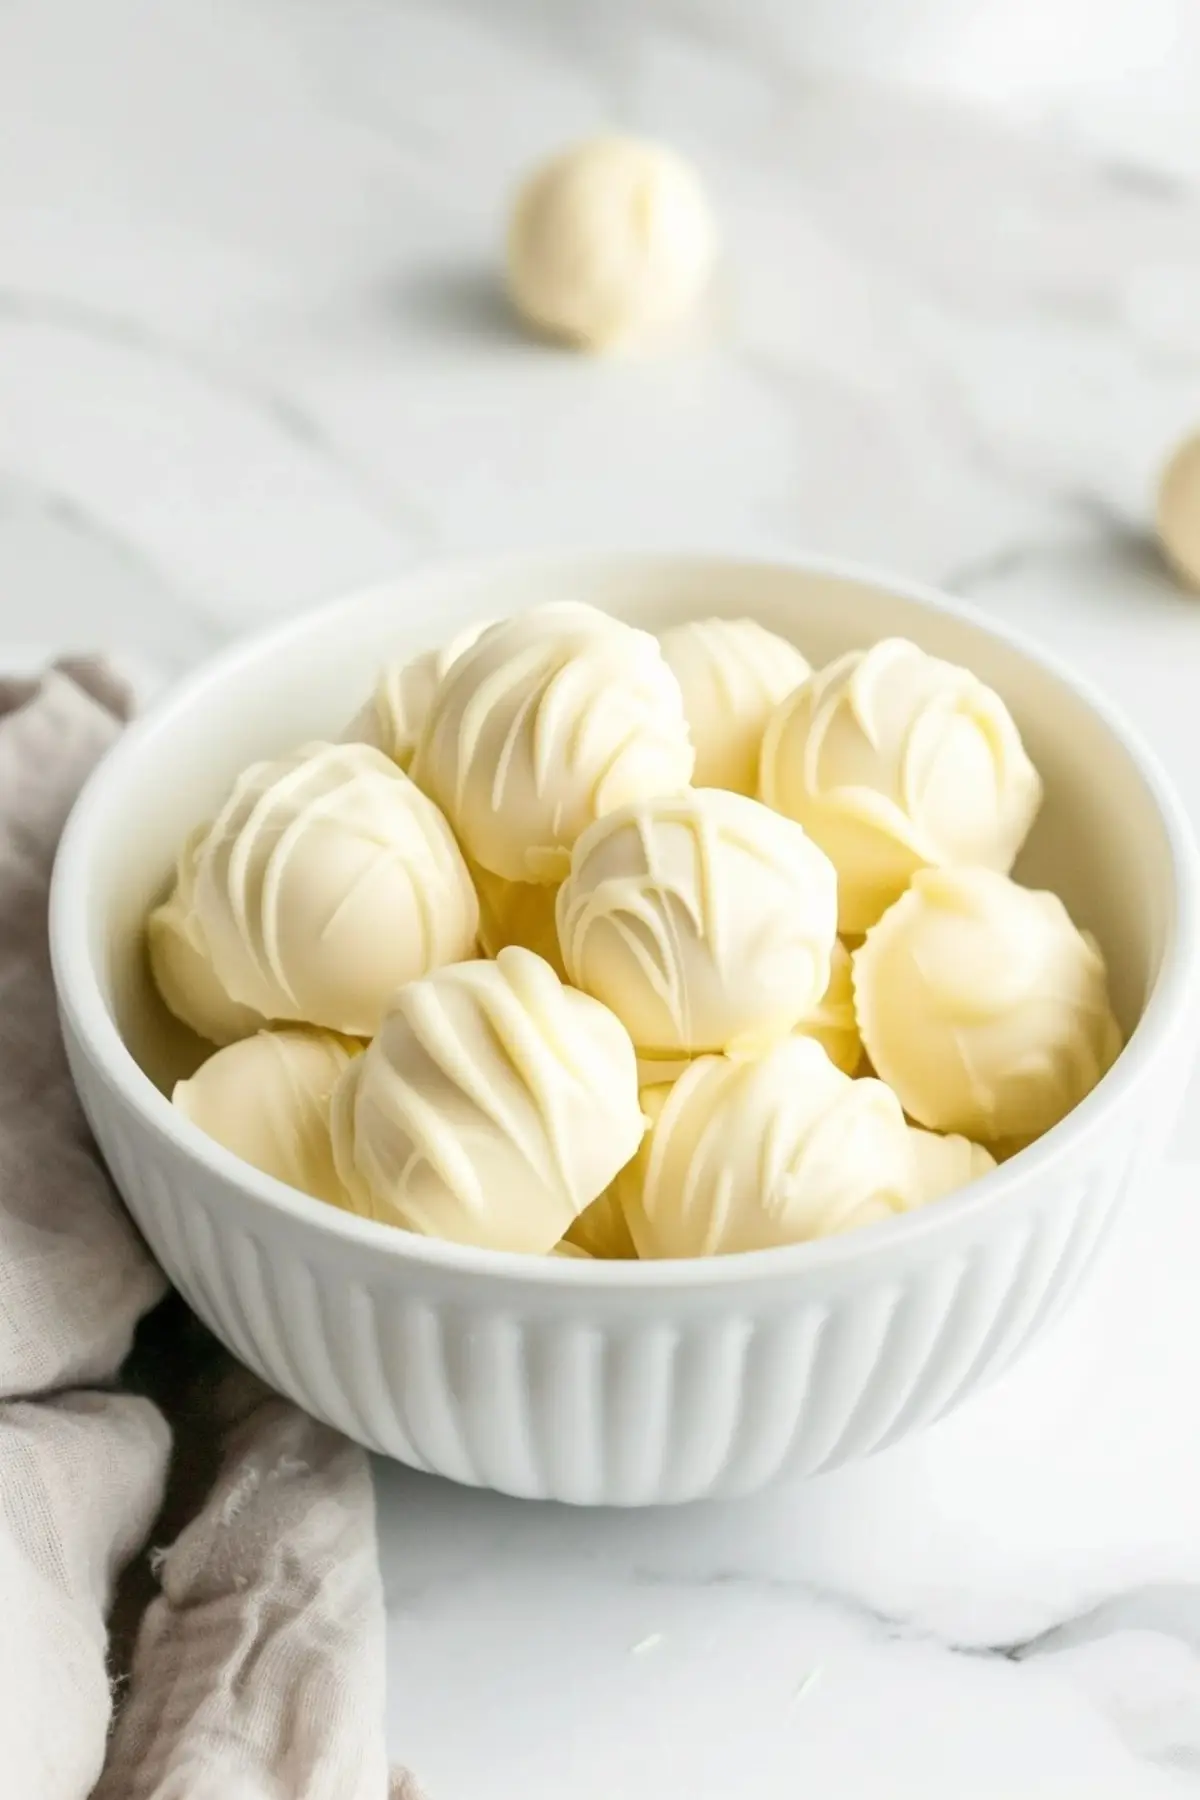 Chocolate truffles coated in white chocolate served on a bowl on top of a white marble table.